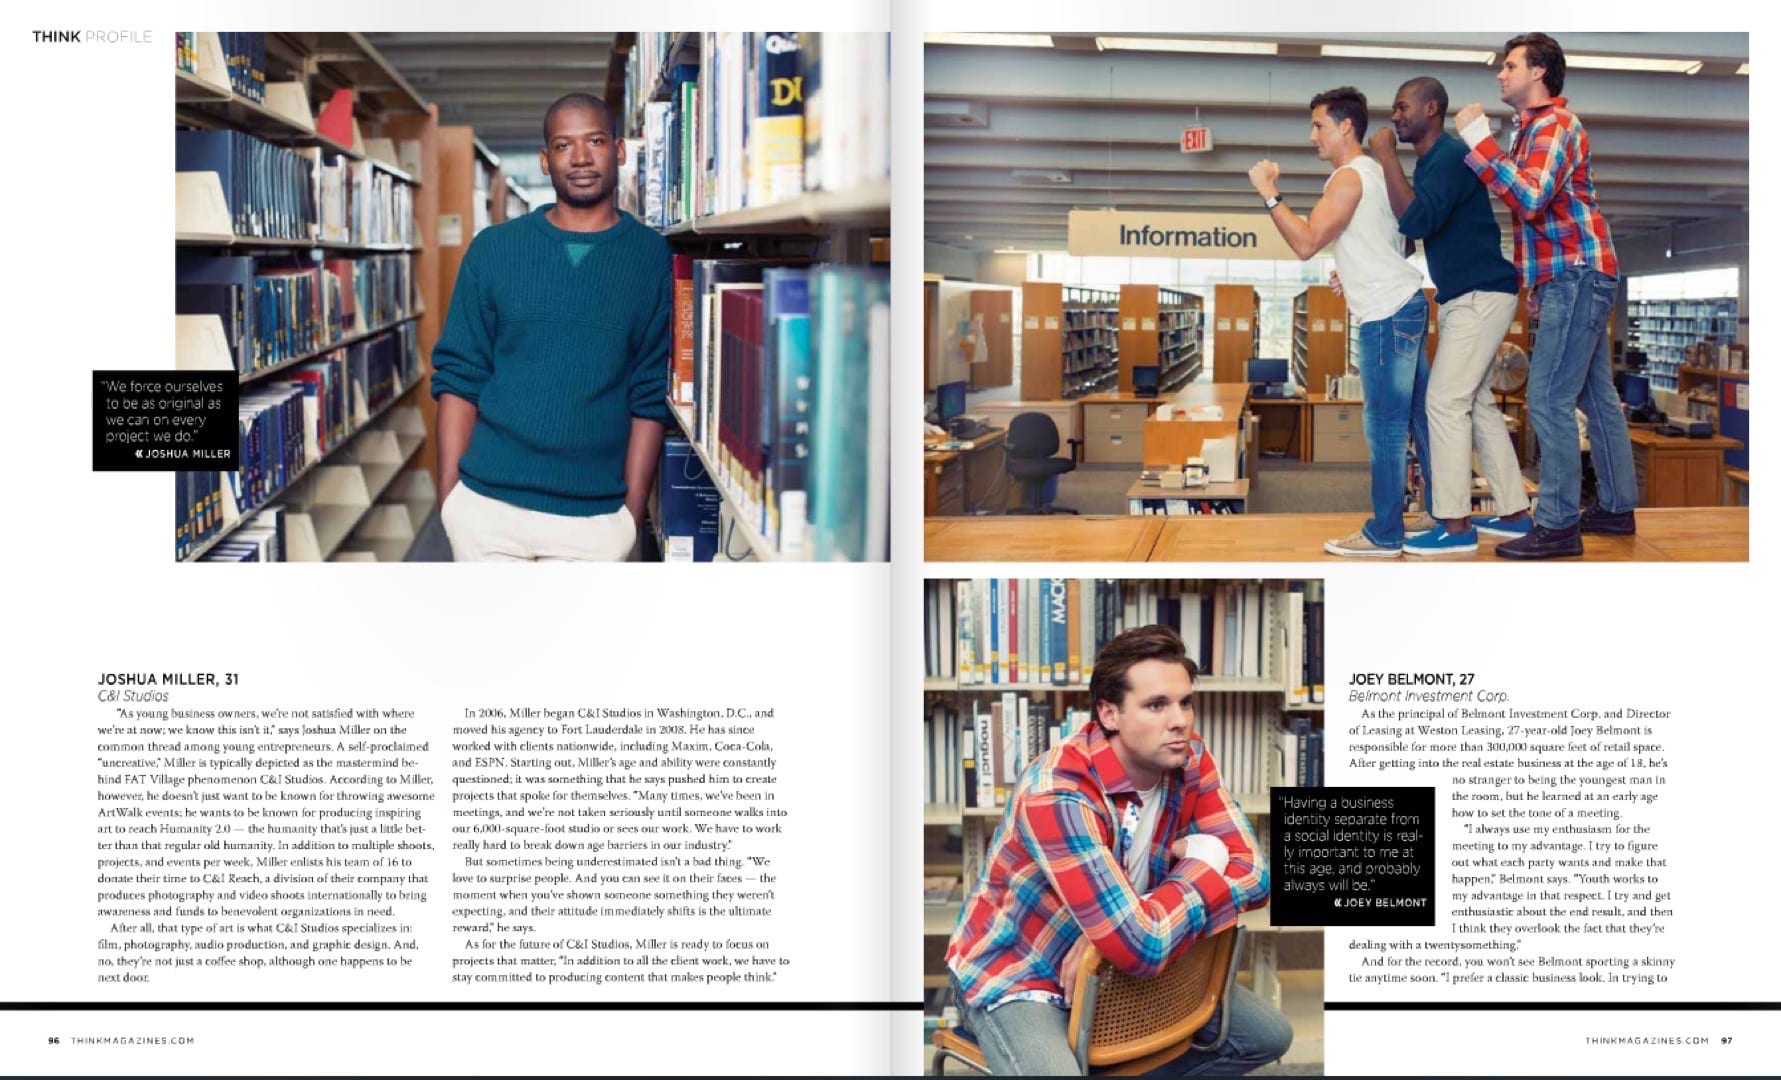 IU C&I Studios Post Pages from Think Magazine about Joshua Miller and Joey Belmont